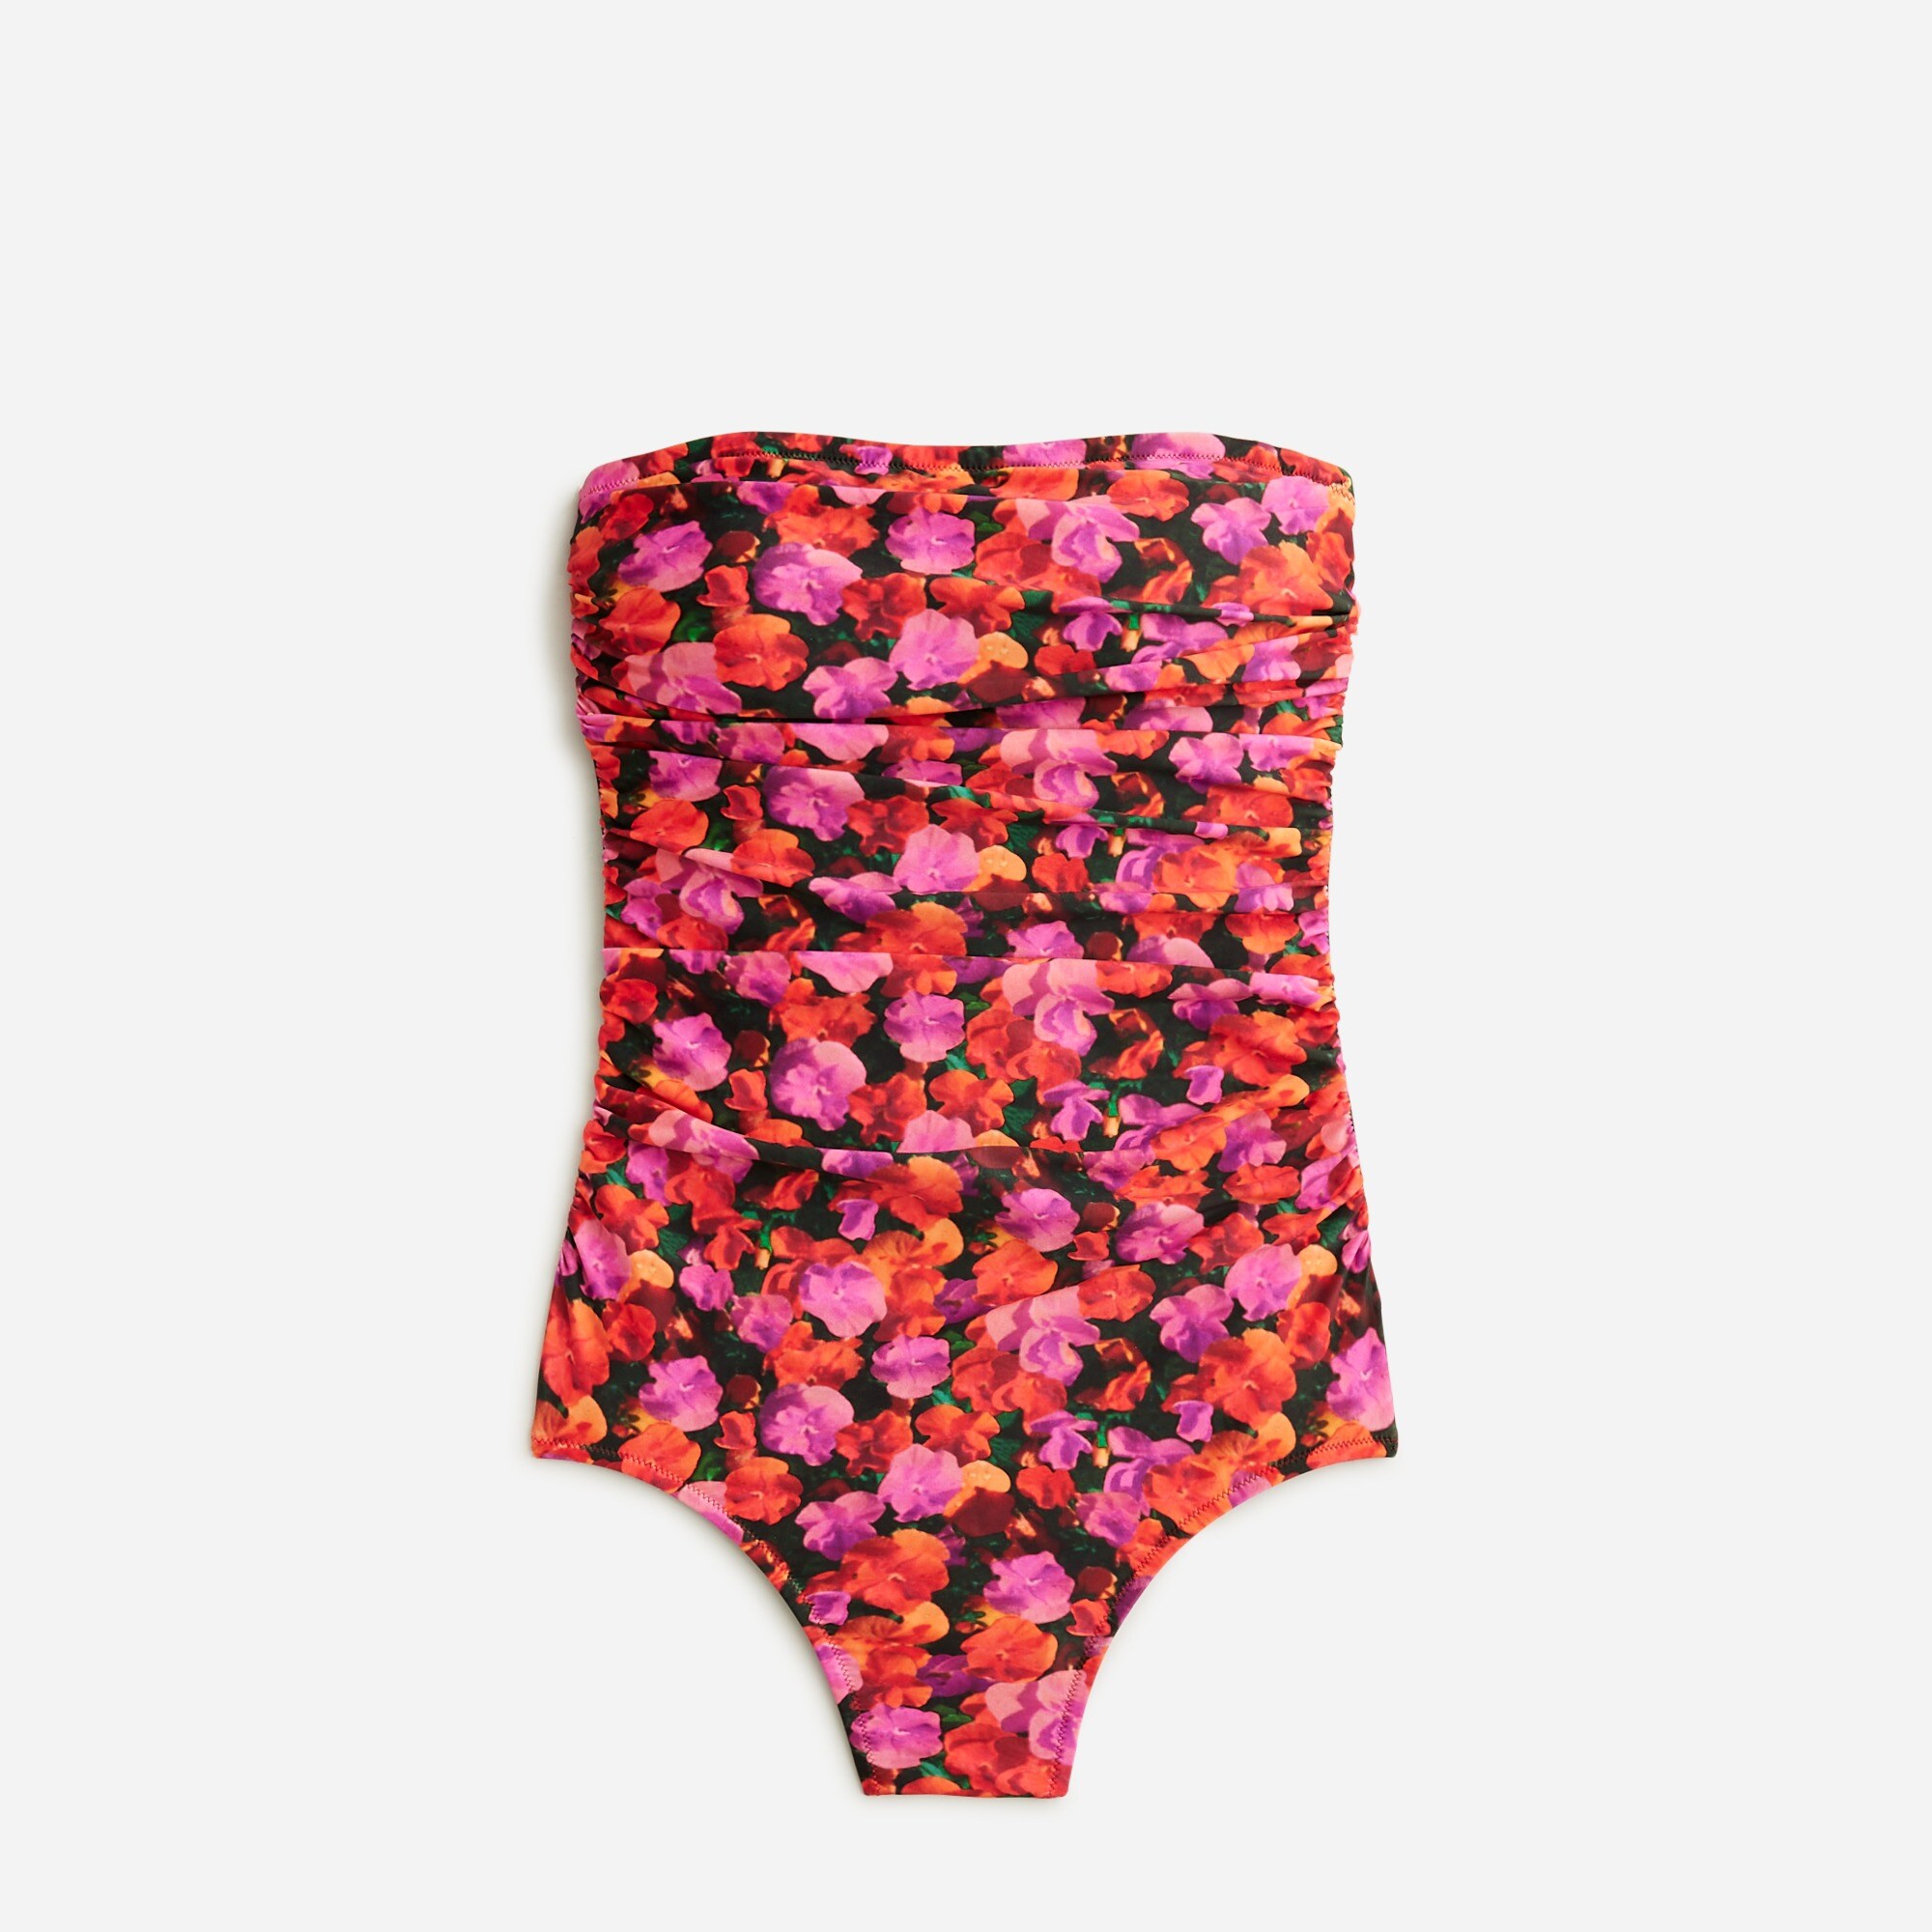  Ruched bandeau one-piece swimsuit in pansy floral